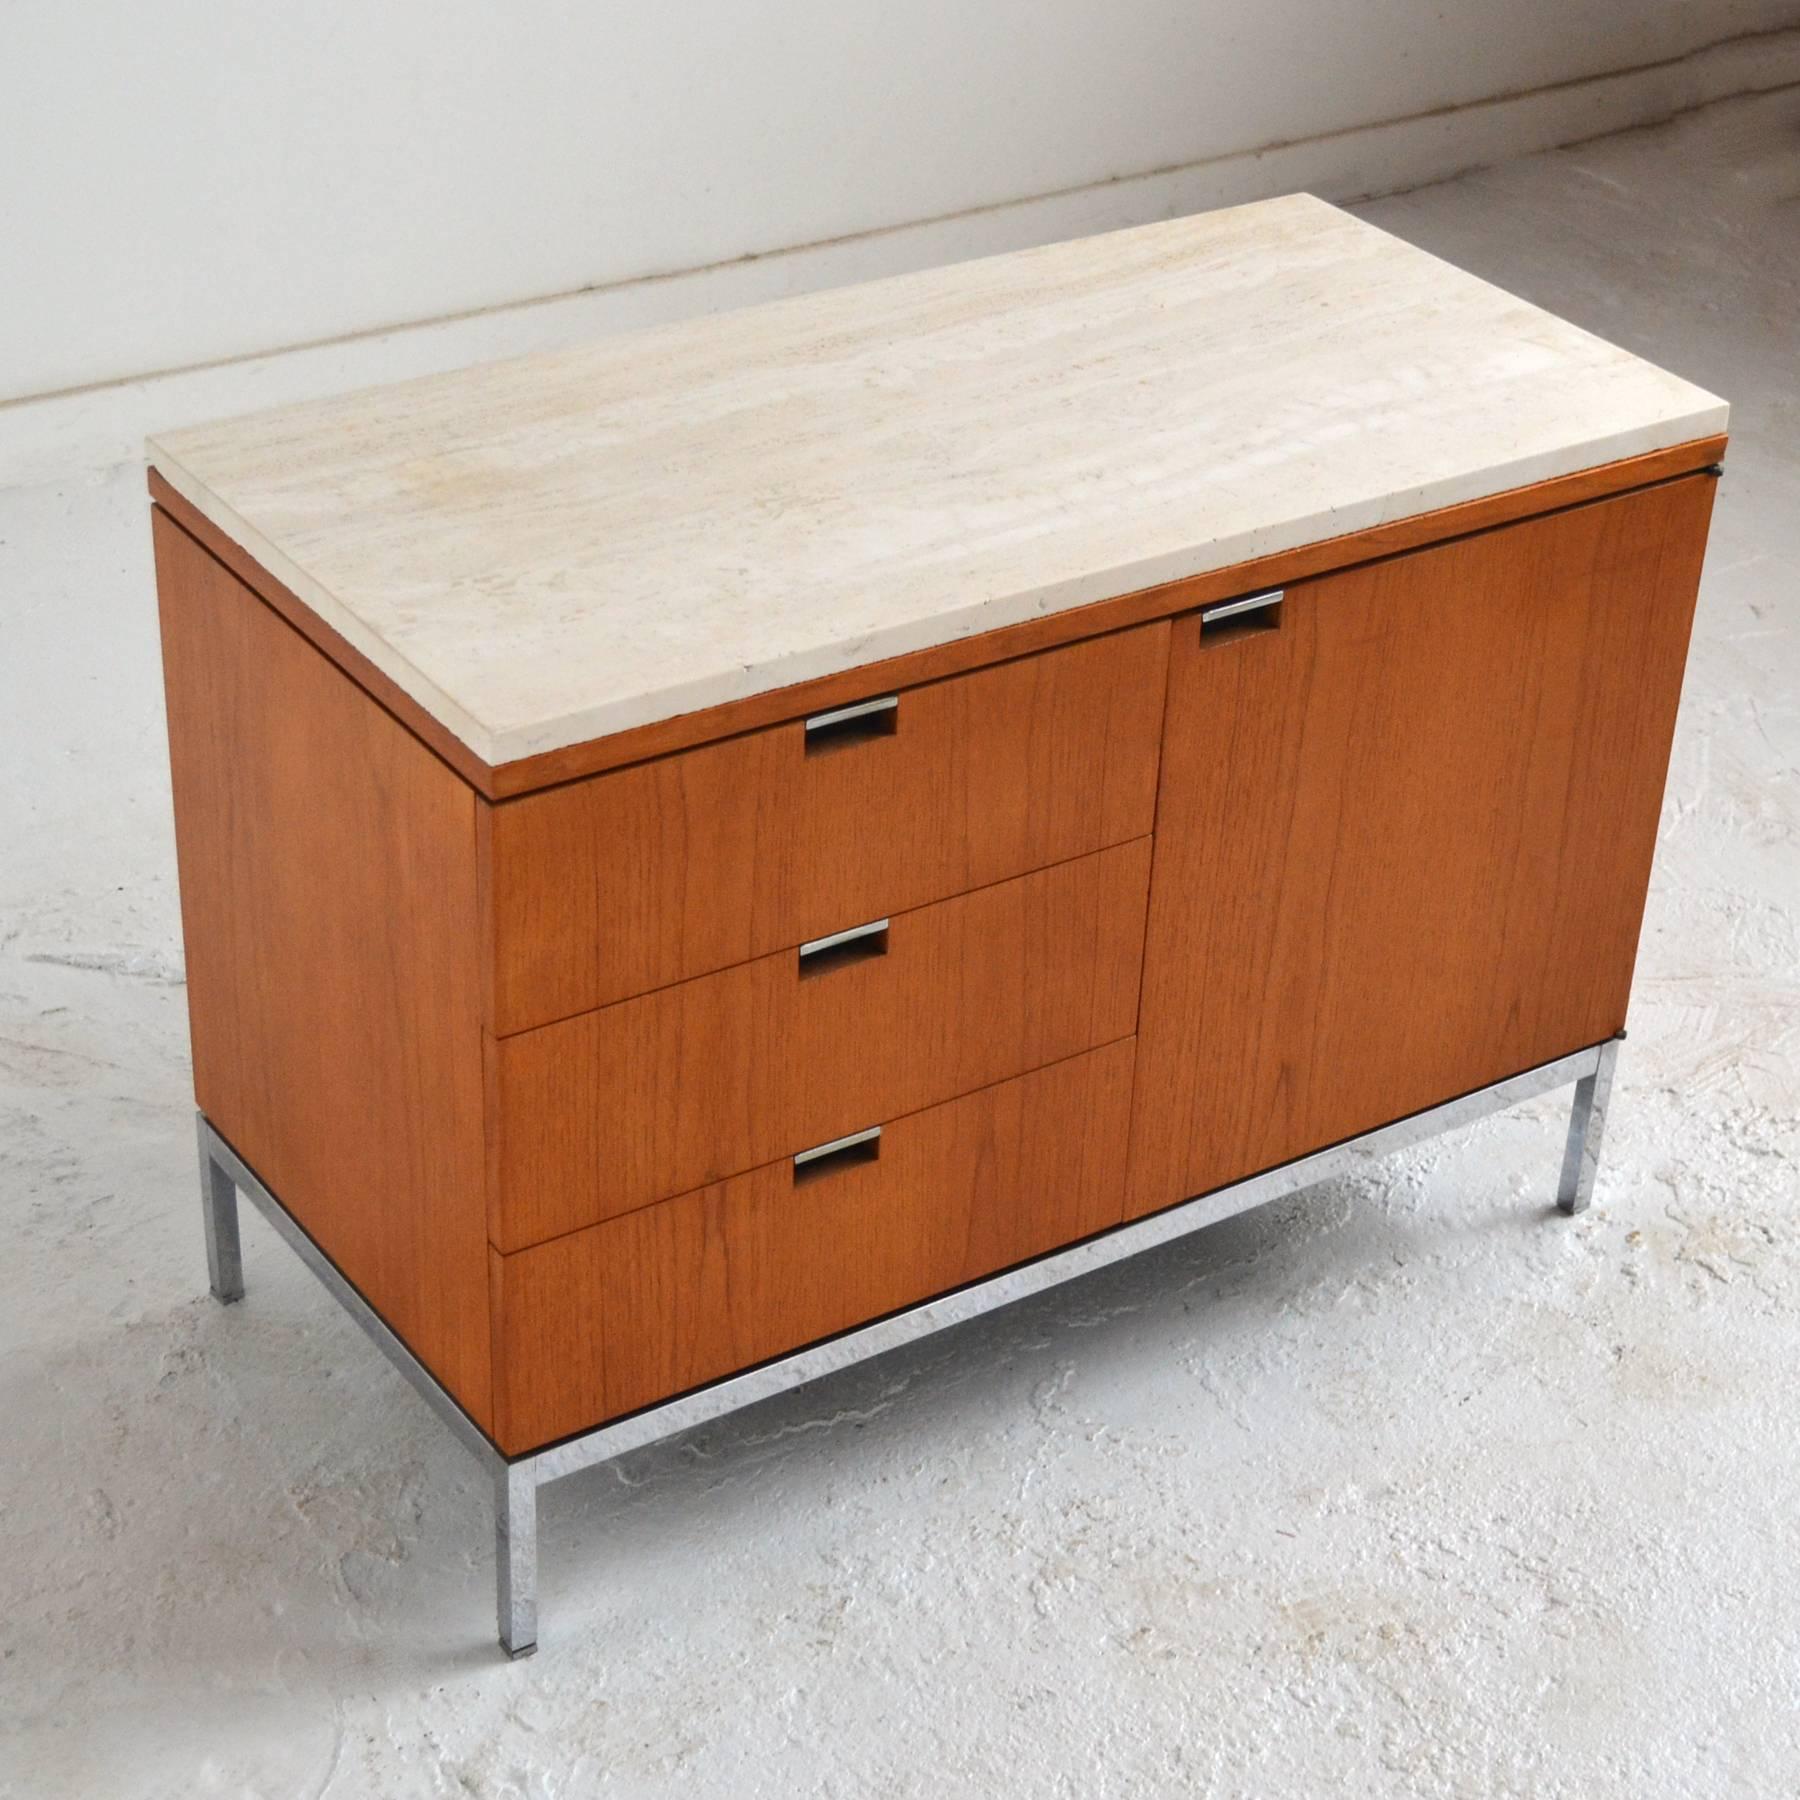 Florence Knoll's understated design sensibility is evident in these teak two position credenzas. They have several very nice subtle details like the recessed drawer pulls, the reveal between the base and body, the adjustable square feet which match